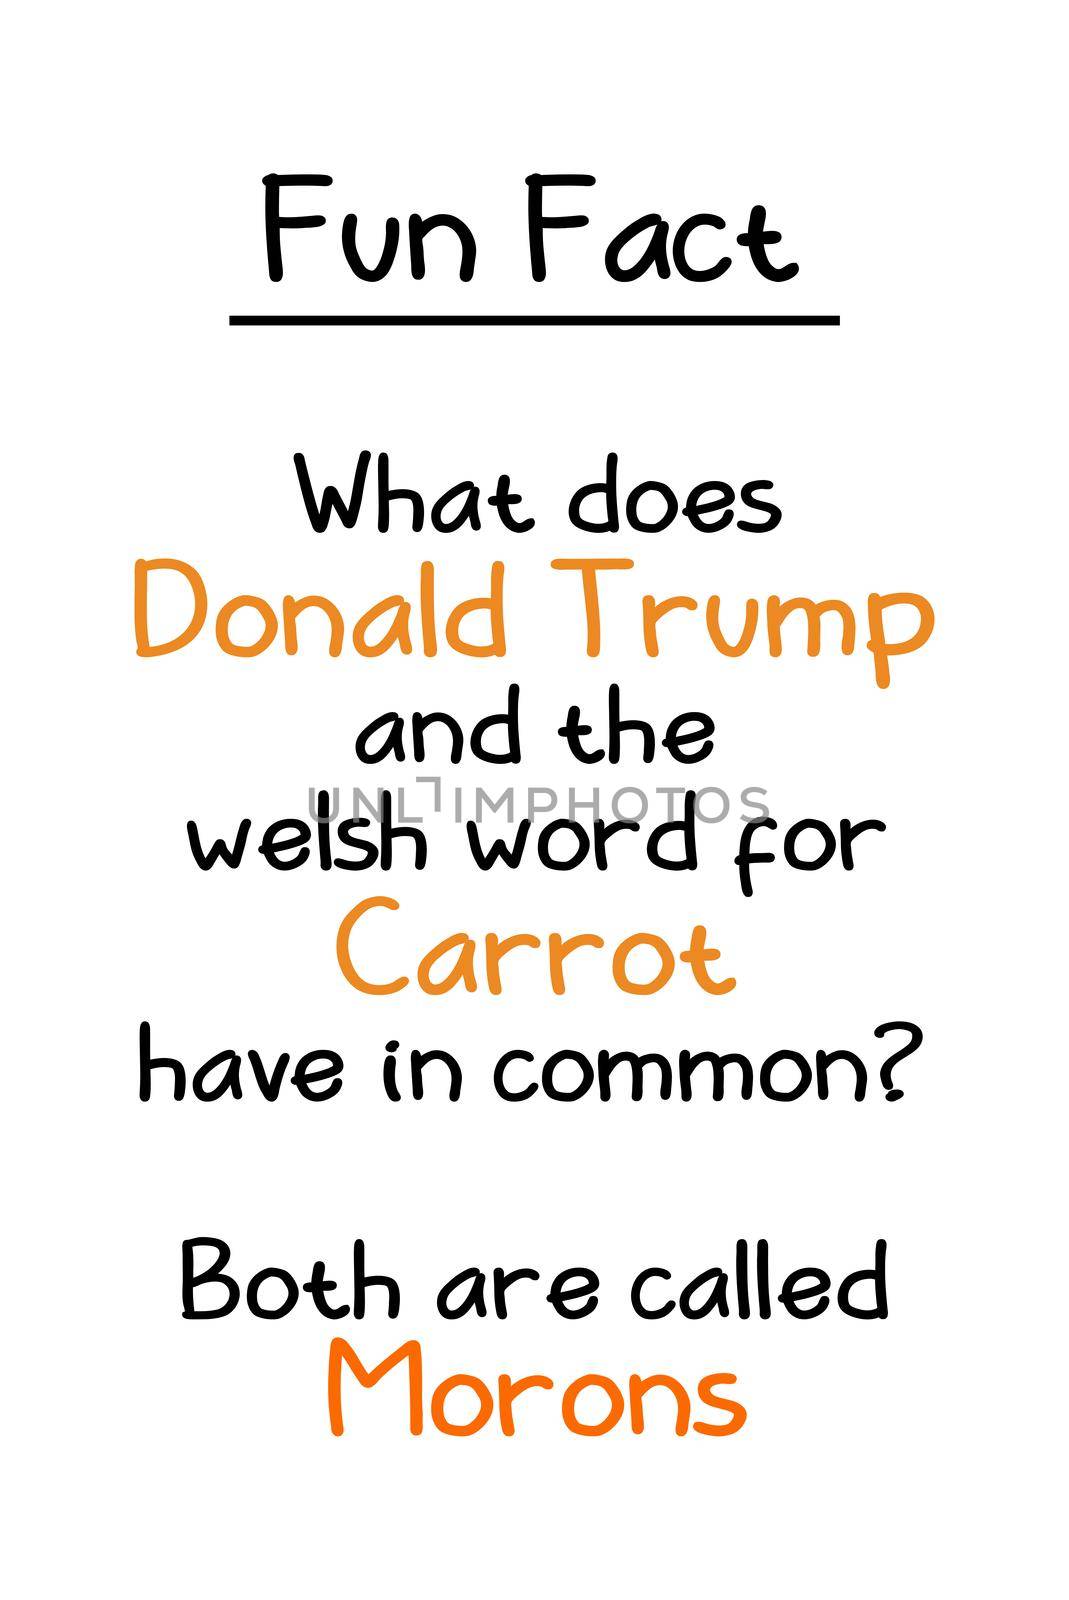 Donald Trump and Welsh Carrot by Bigalbaloo